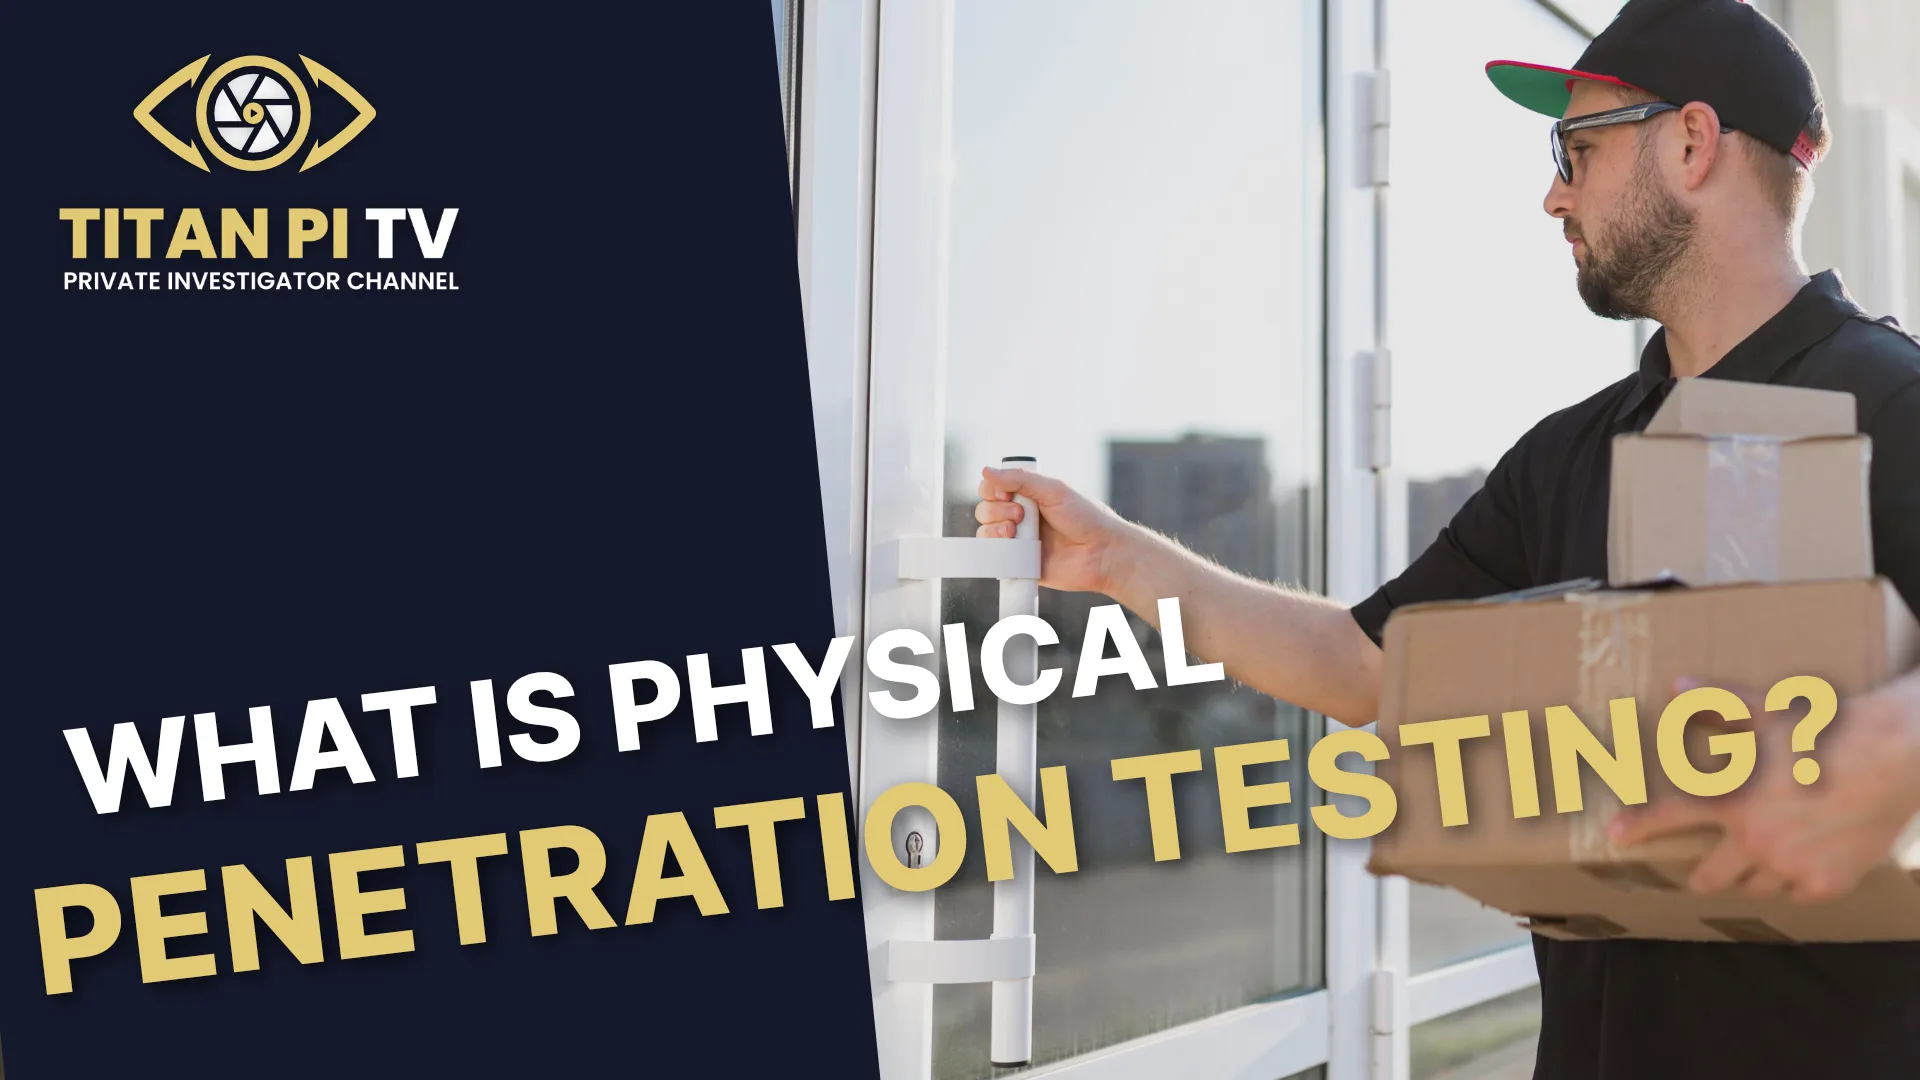 What is Physical Penetration Testing? Episode 42 | Titan PI TV